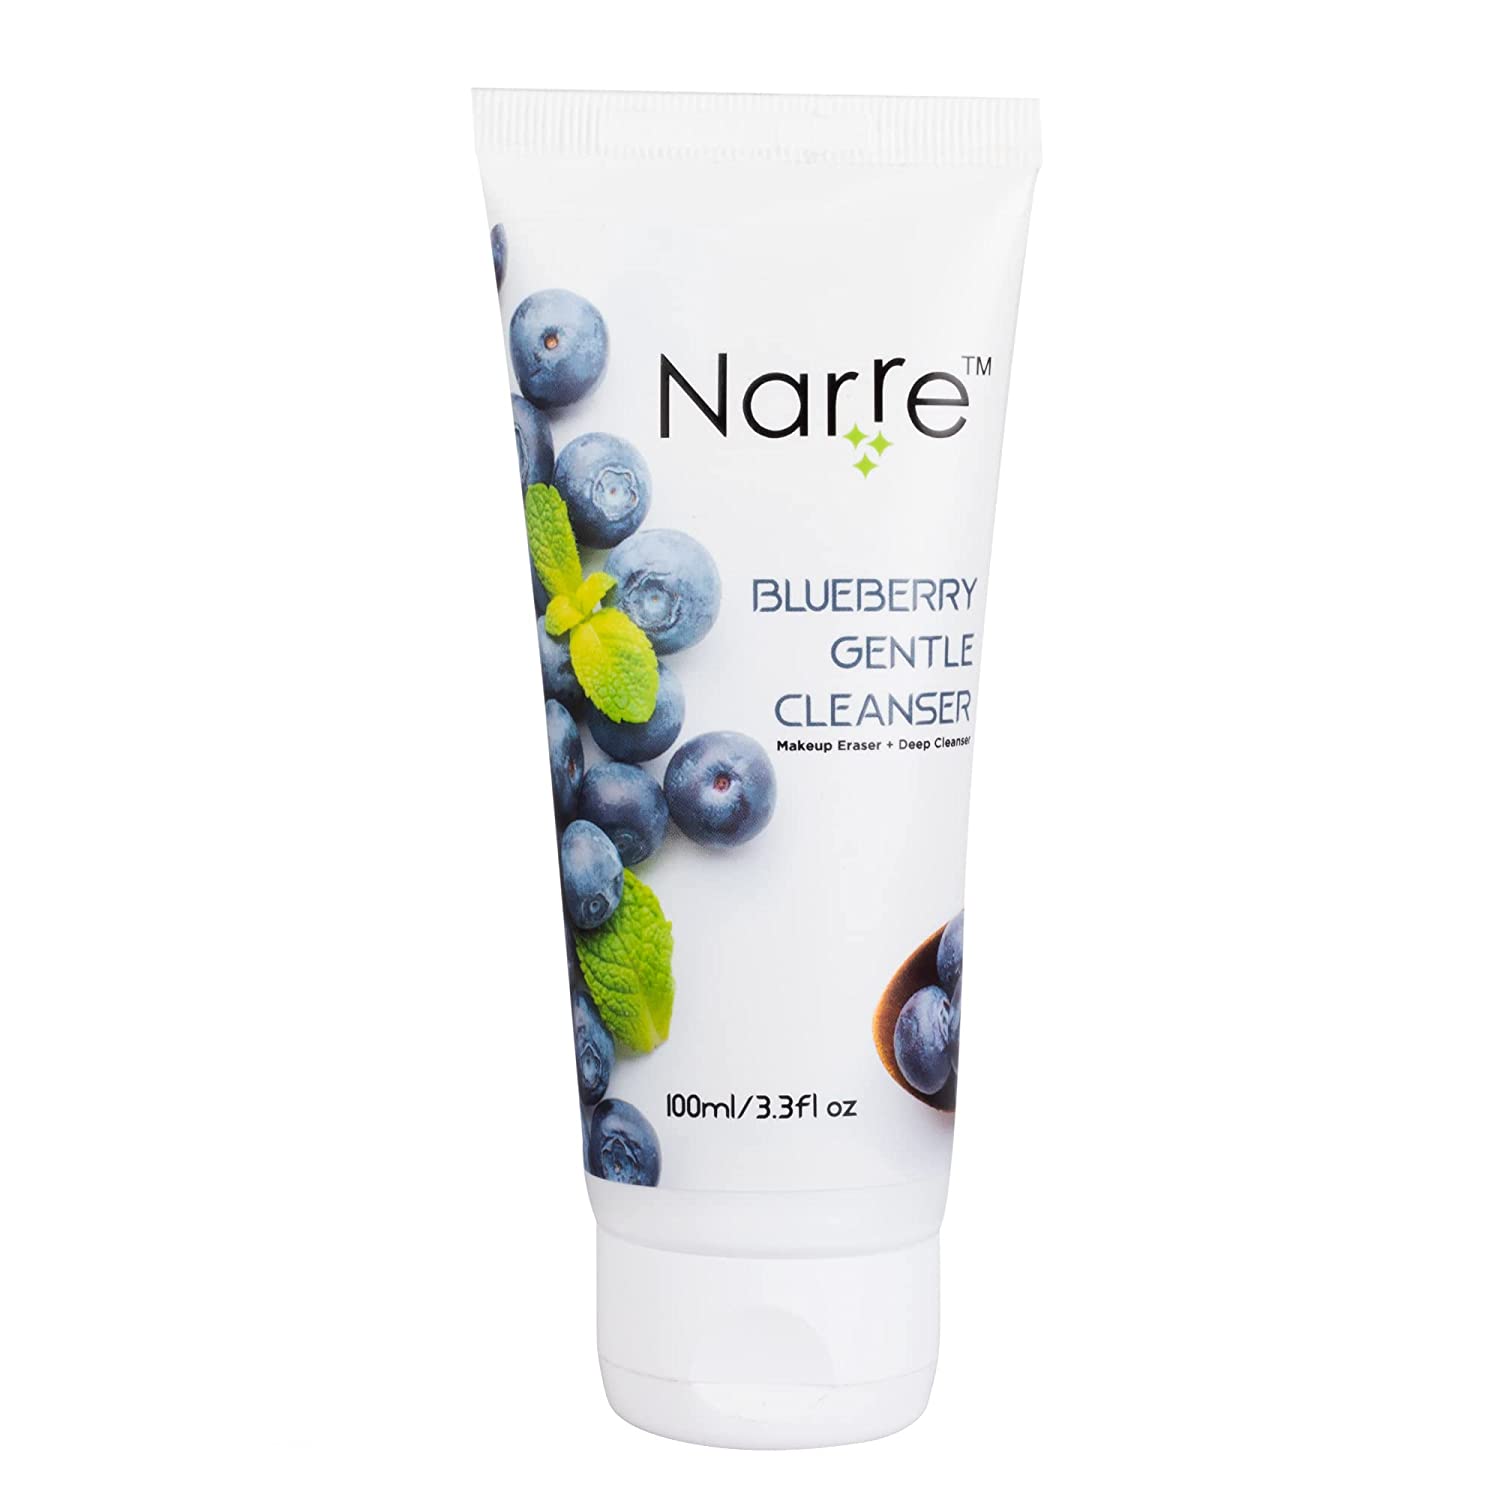 Narre-Blueberry Gentle Cleanser